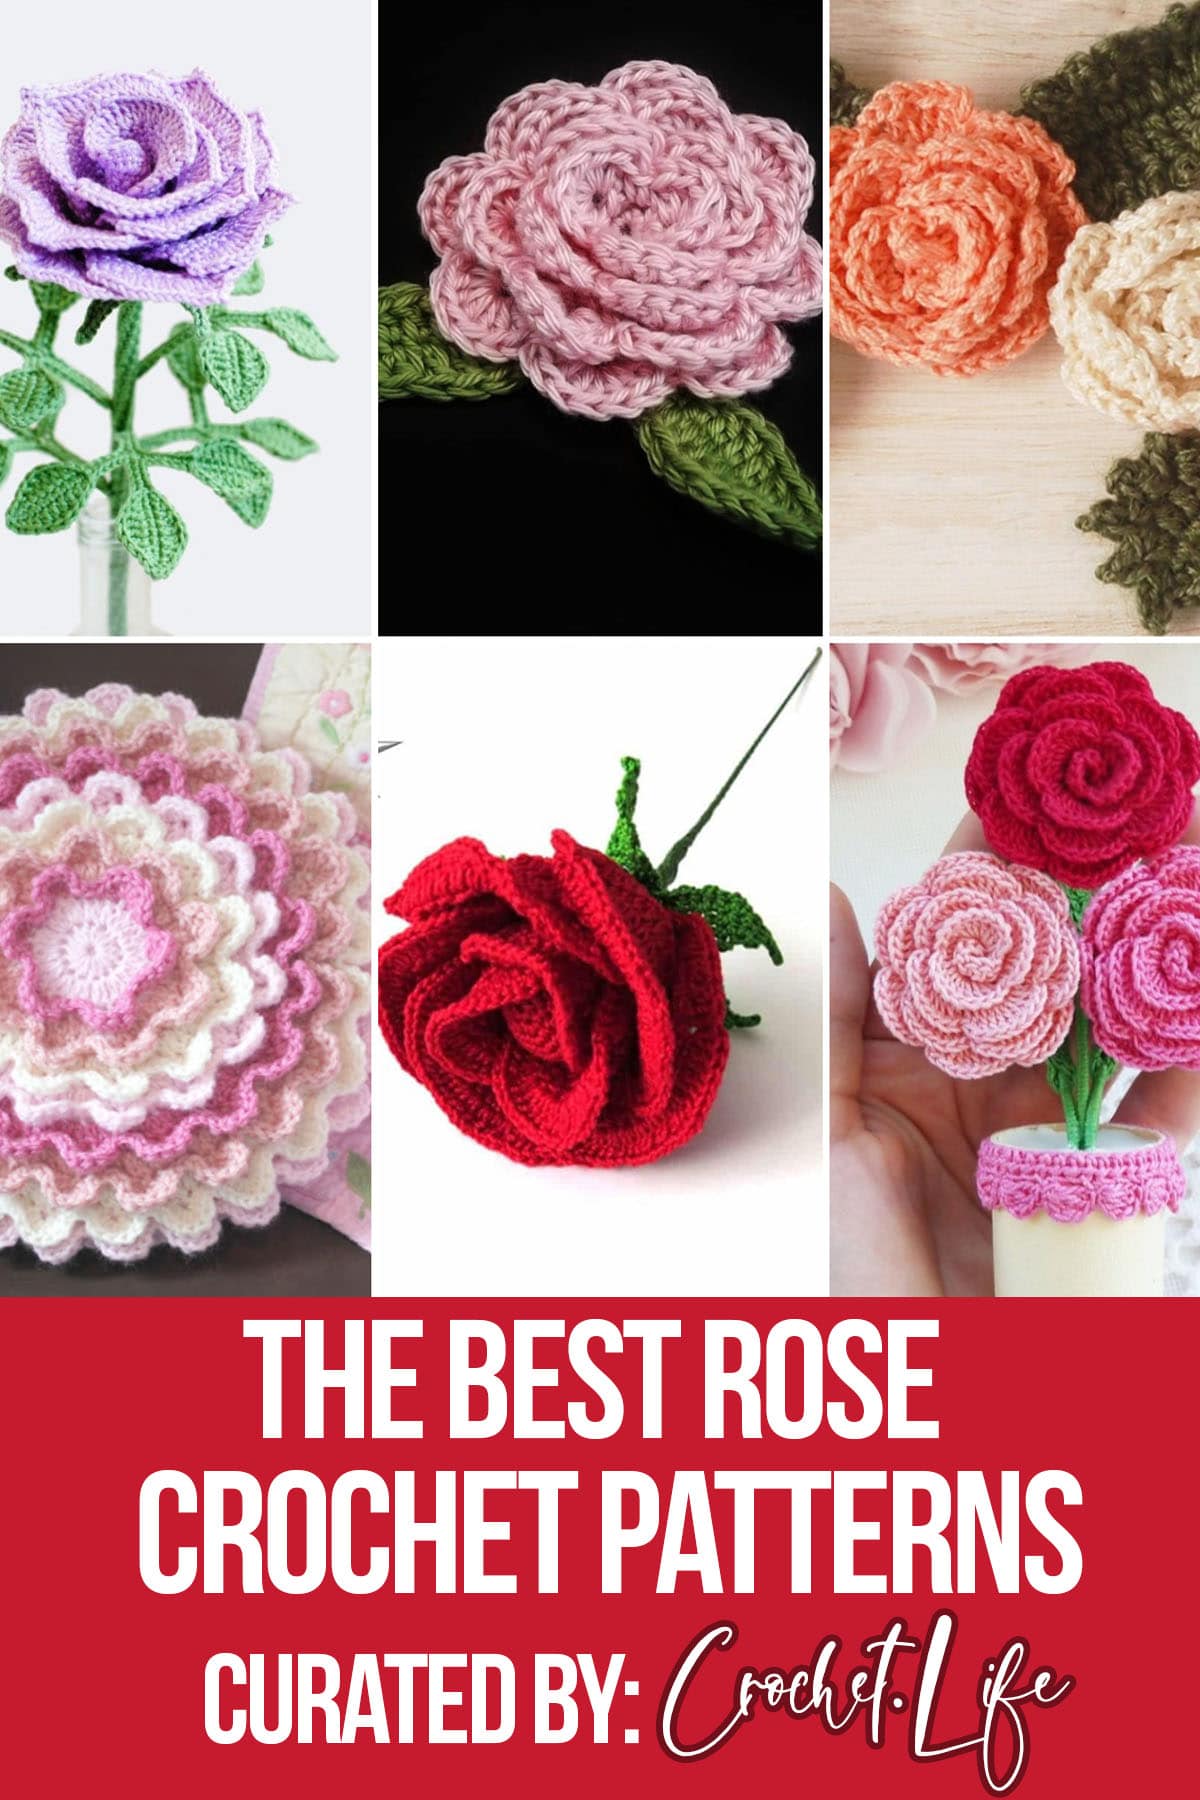 photo collage of crochet patterns of roses with text which reads the best rose crochet patterns curated by crochet.life 